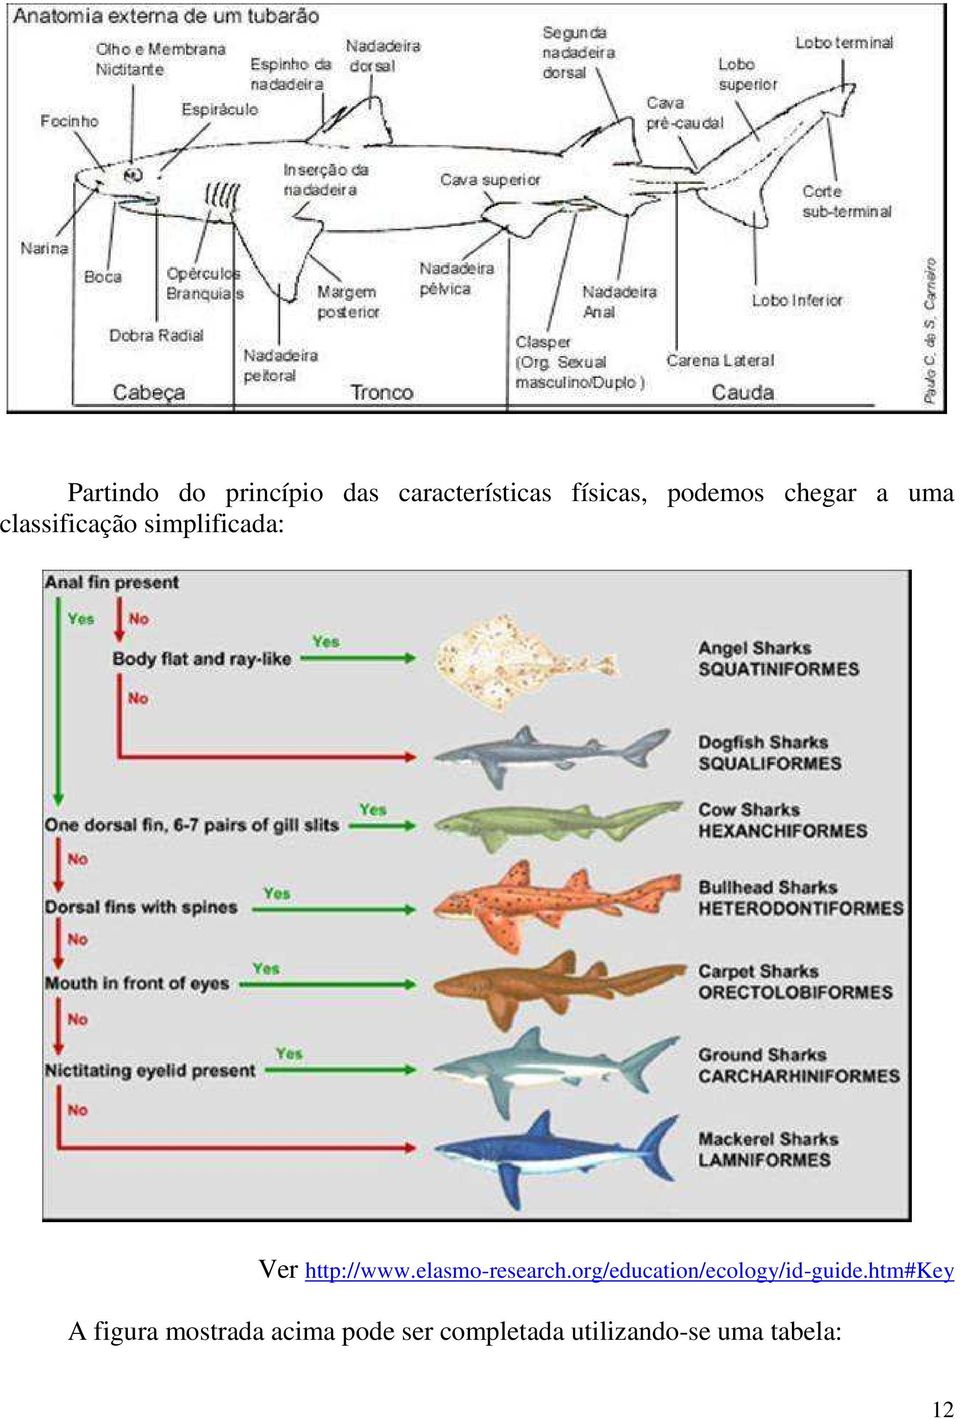 elasmo-research.org/education/ecology/id-guide.